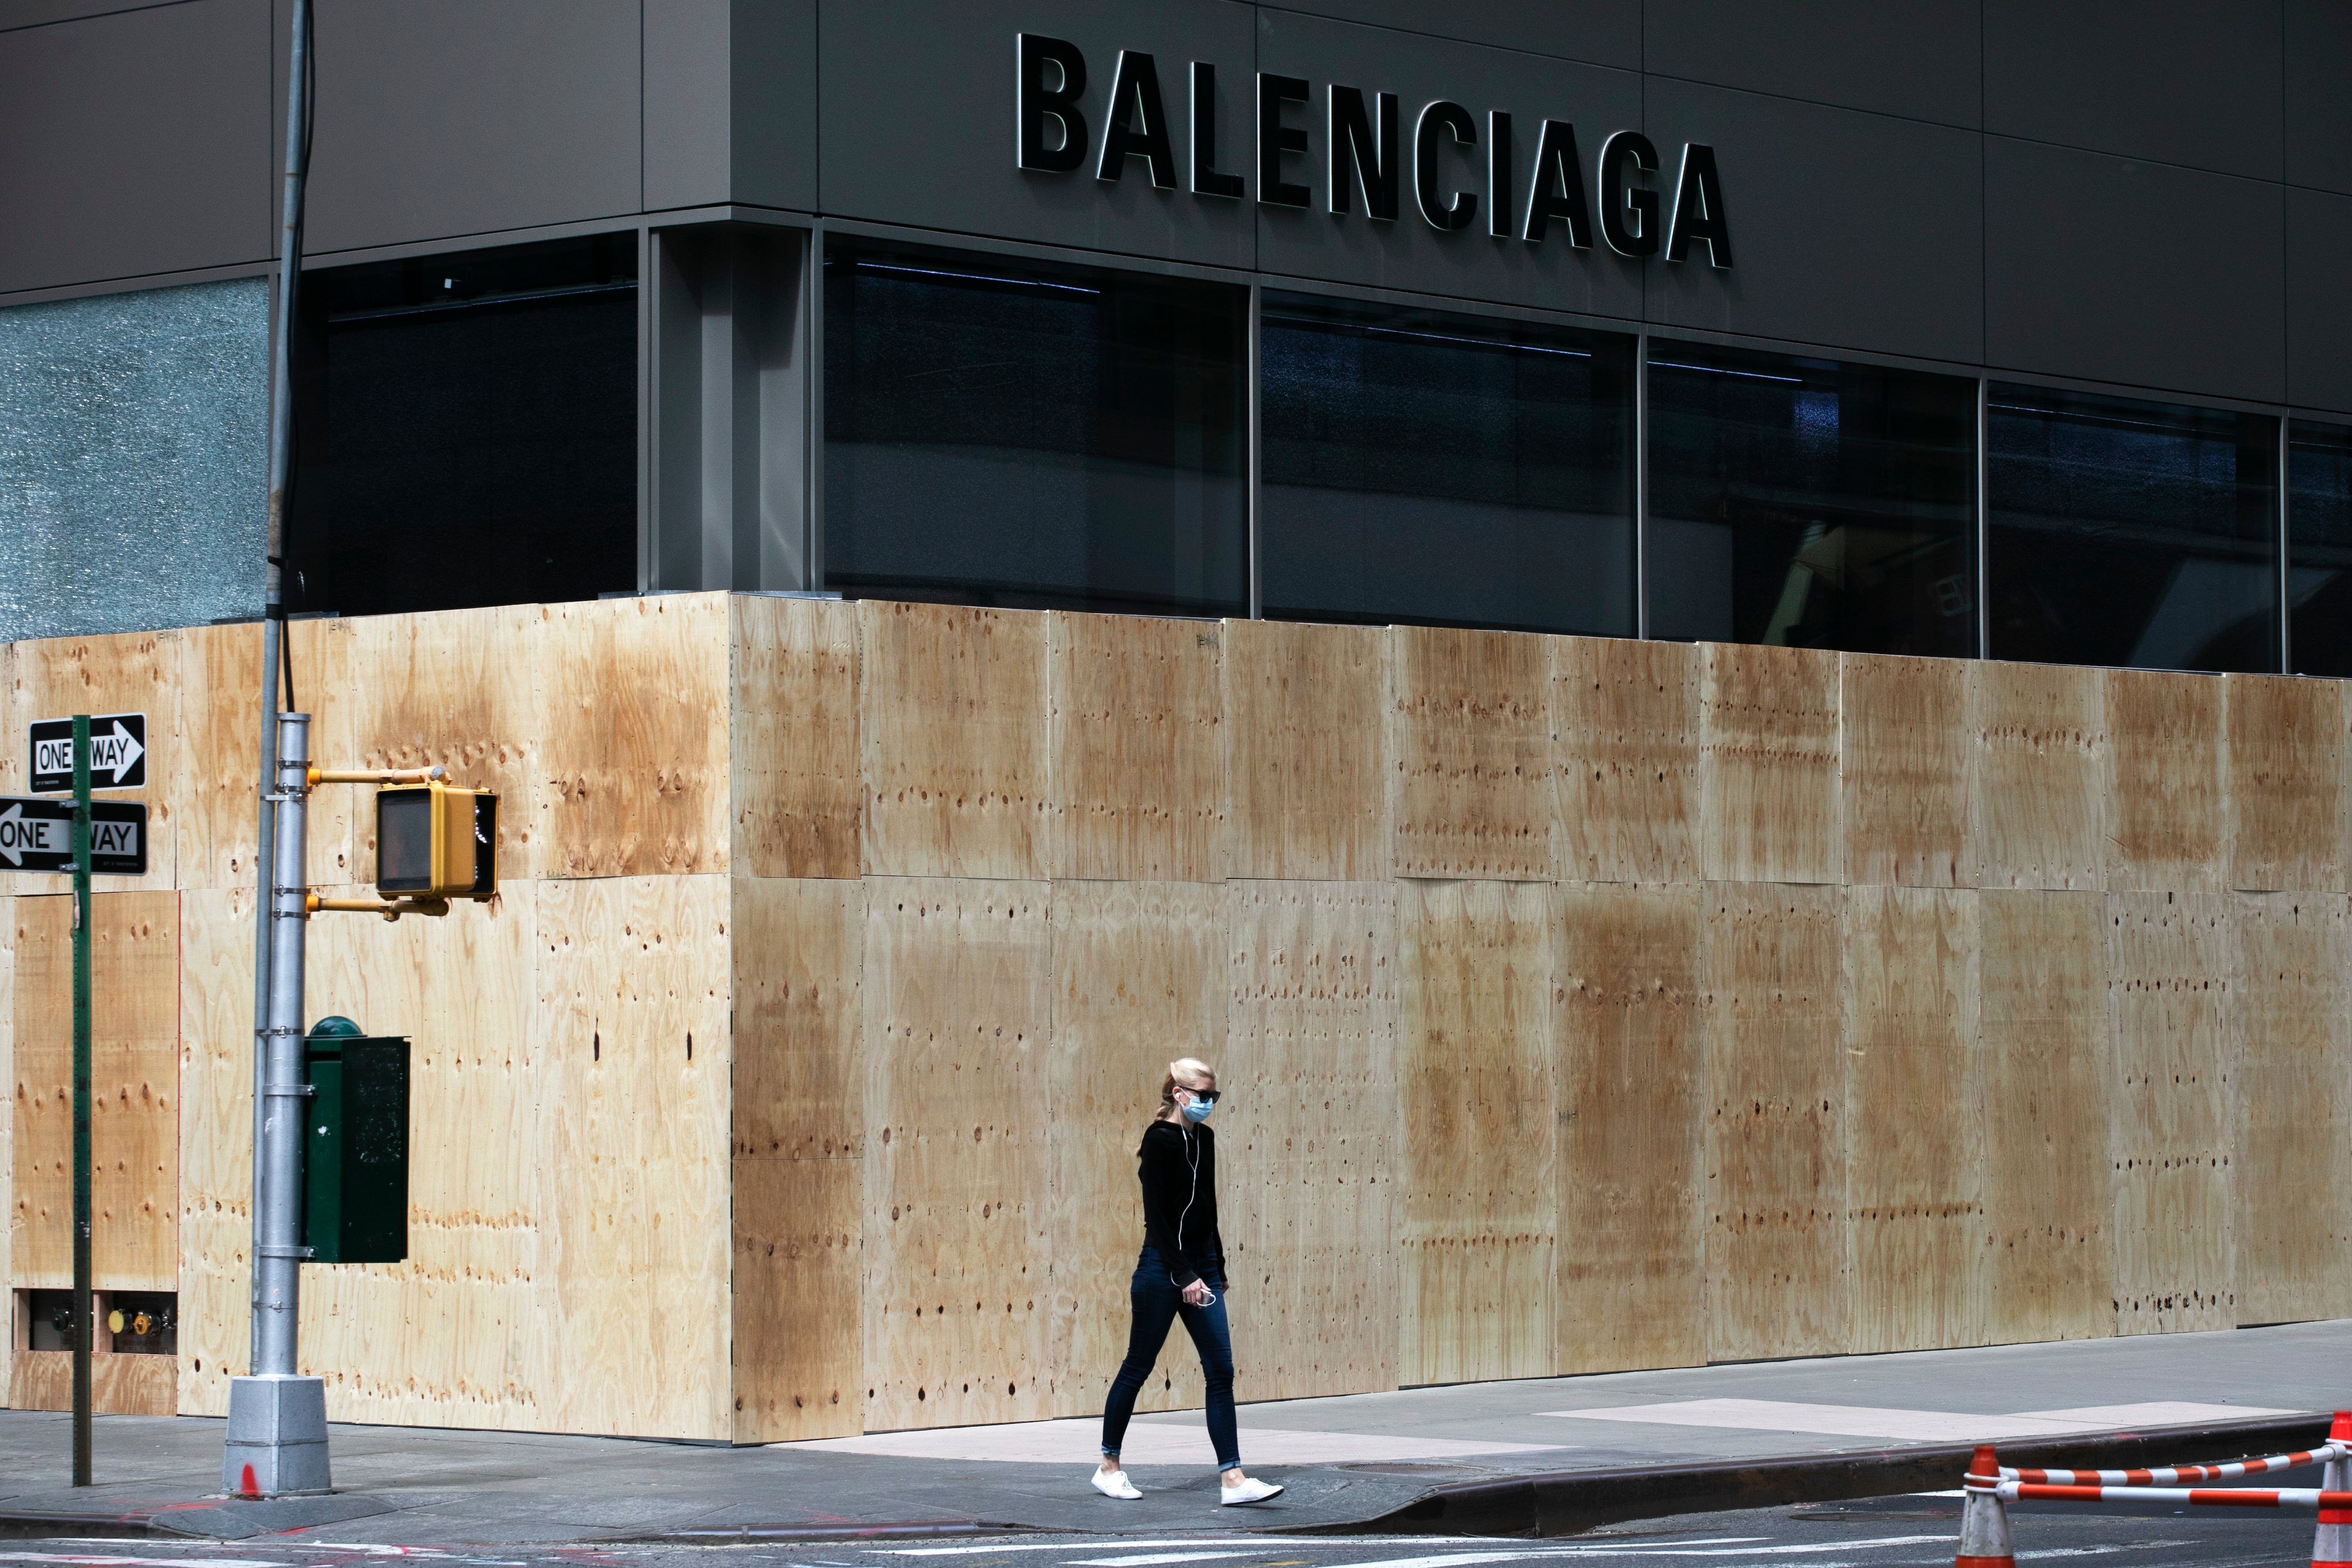 people mad at Balenciaga? Five things to know about the ad campaign controversy